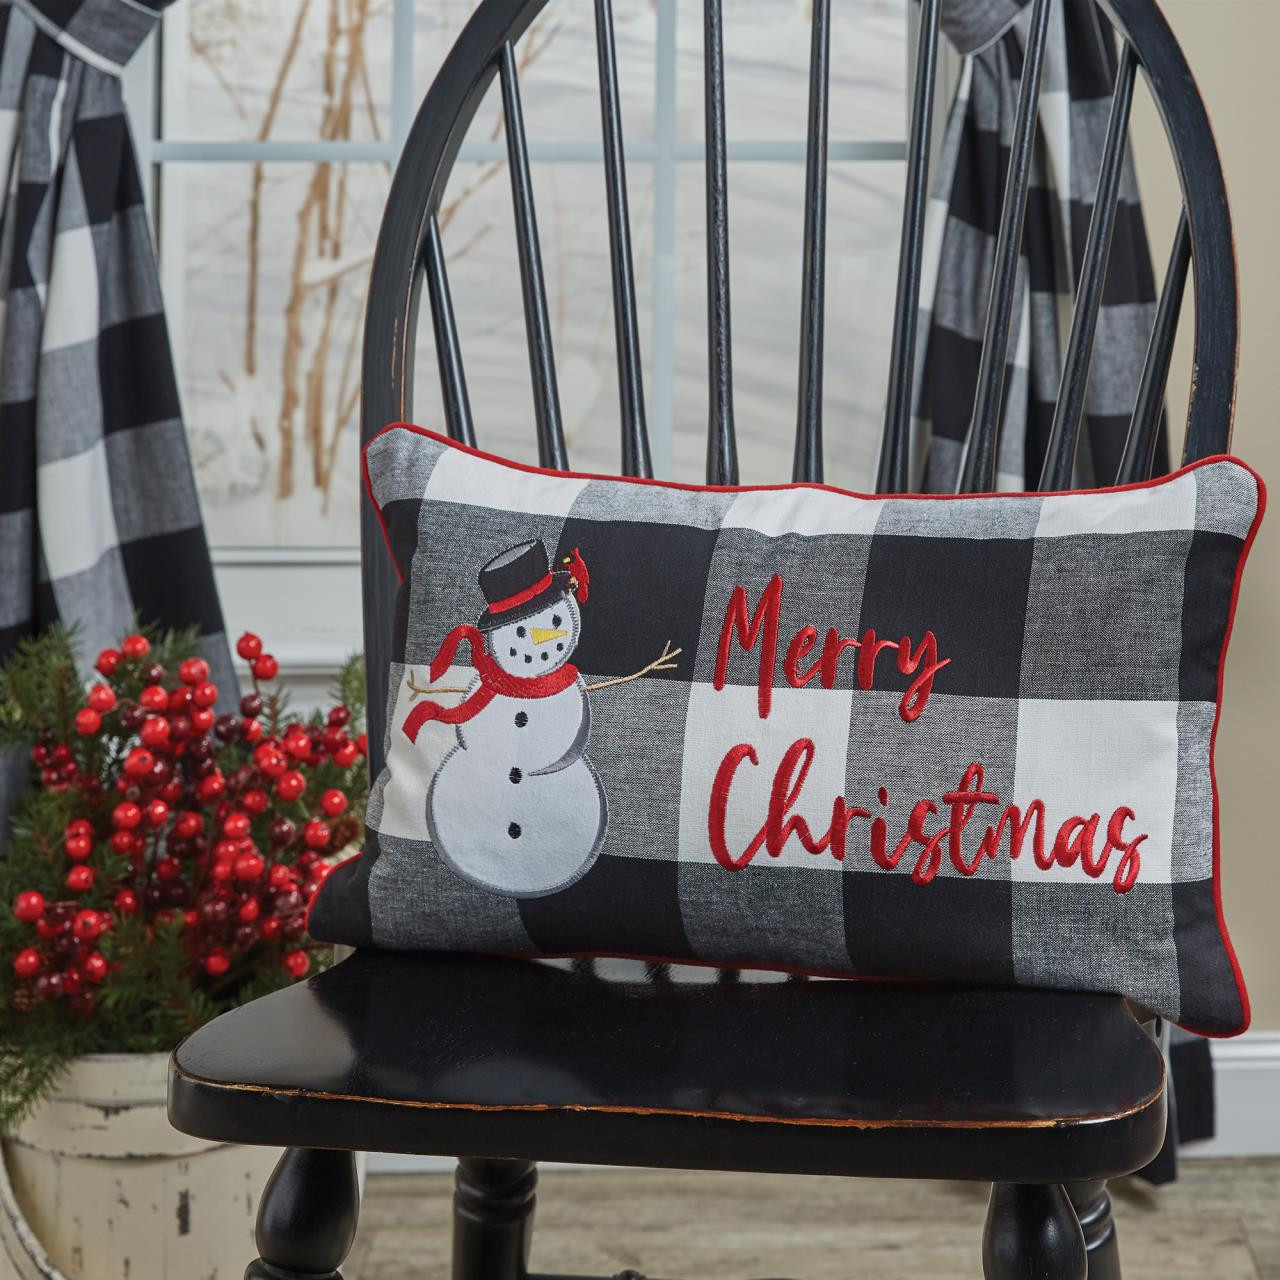 https://cdn11.bigcommerce.com/s-tfdhmk/images/stencil/1280x1280/products/18772/181293/Wicklow-Pillow-Merry-Christmas-400000604329_image3__59412.1689076202.jpg?c=2